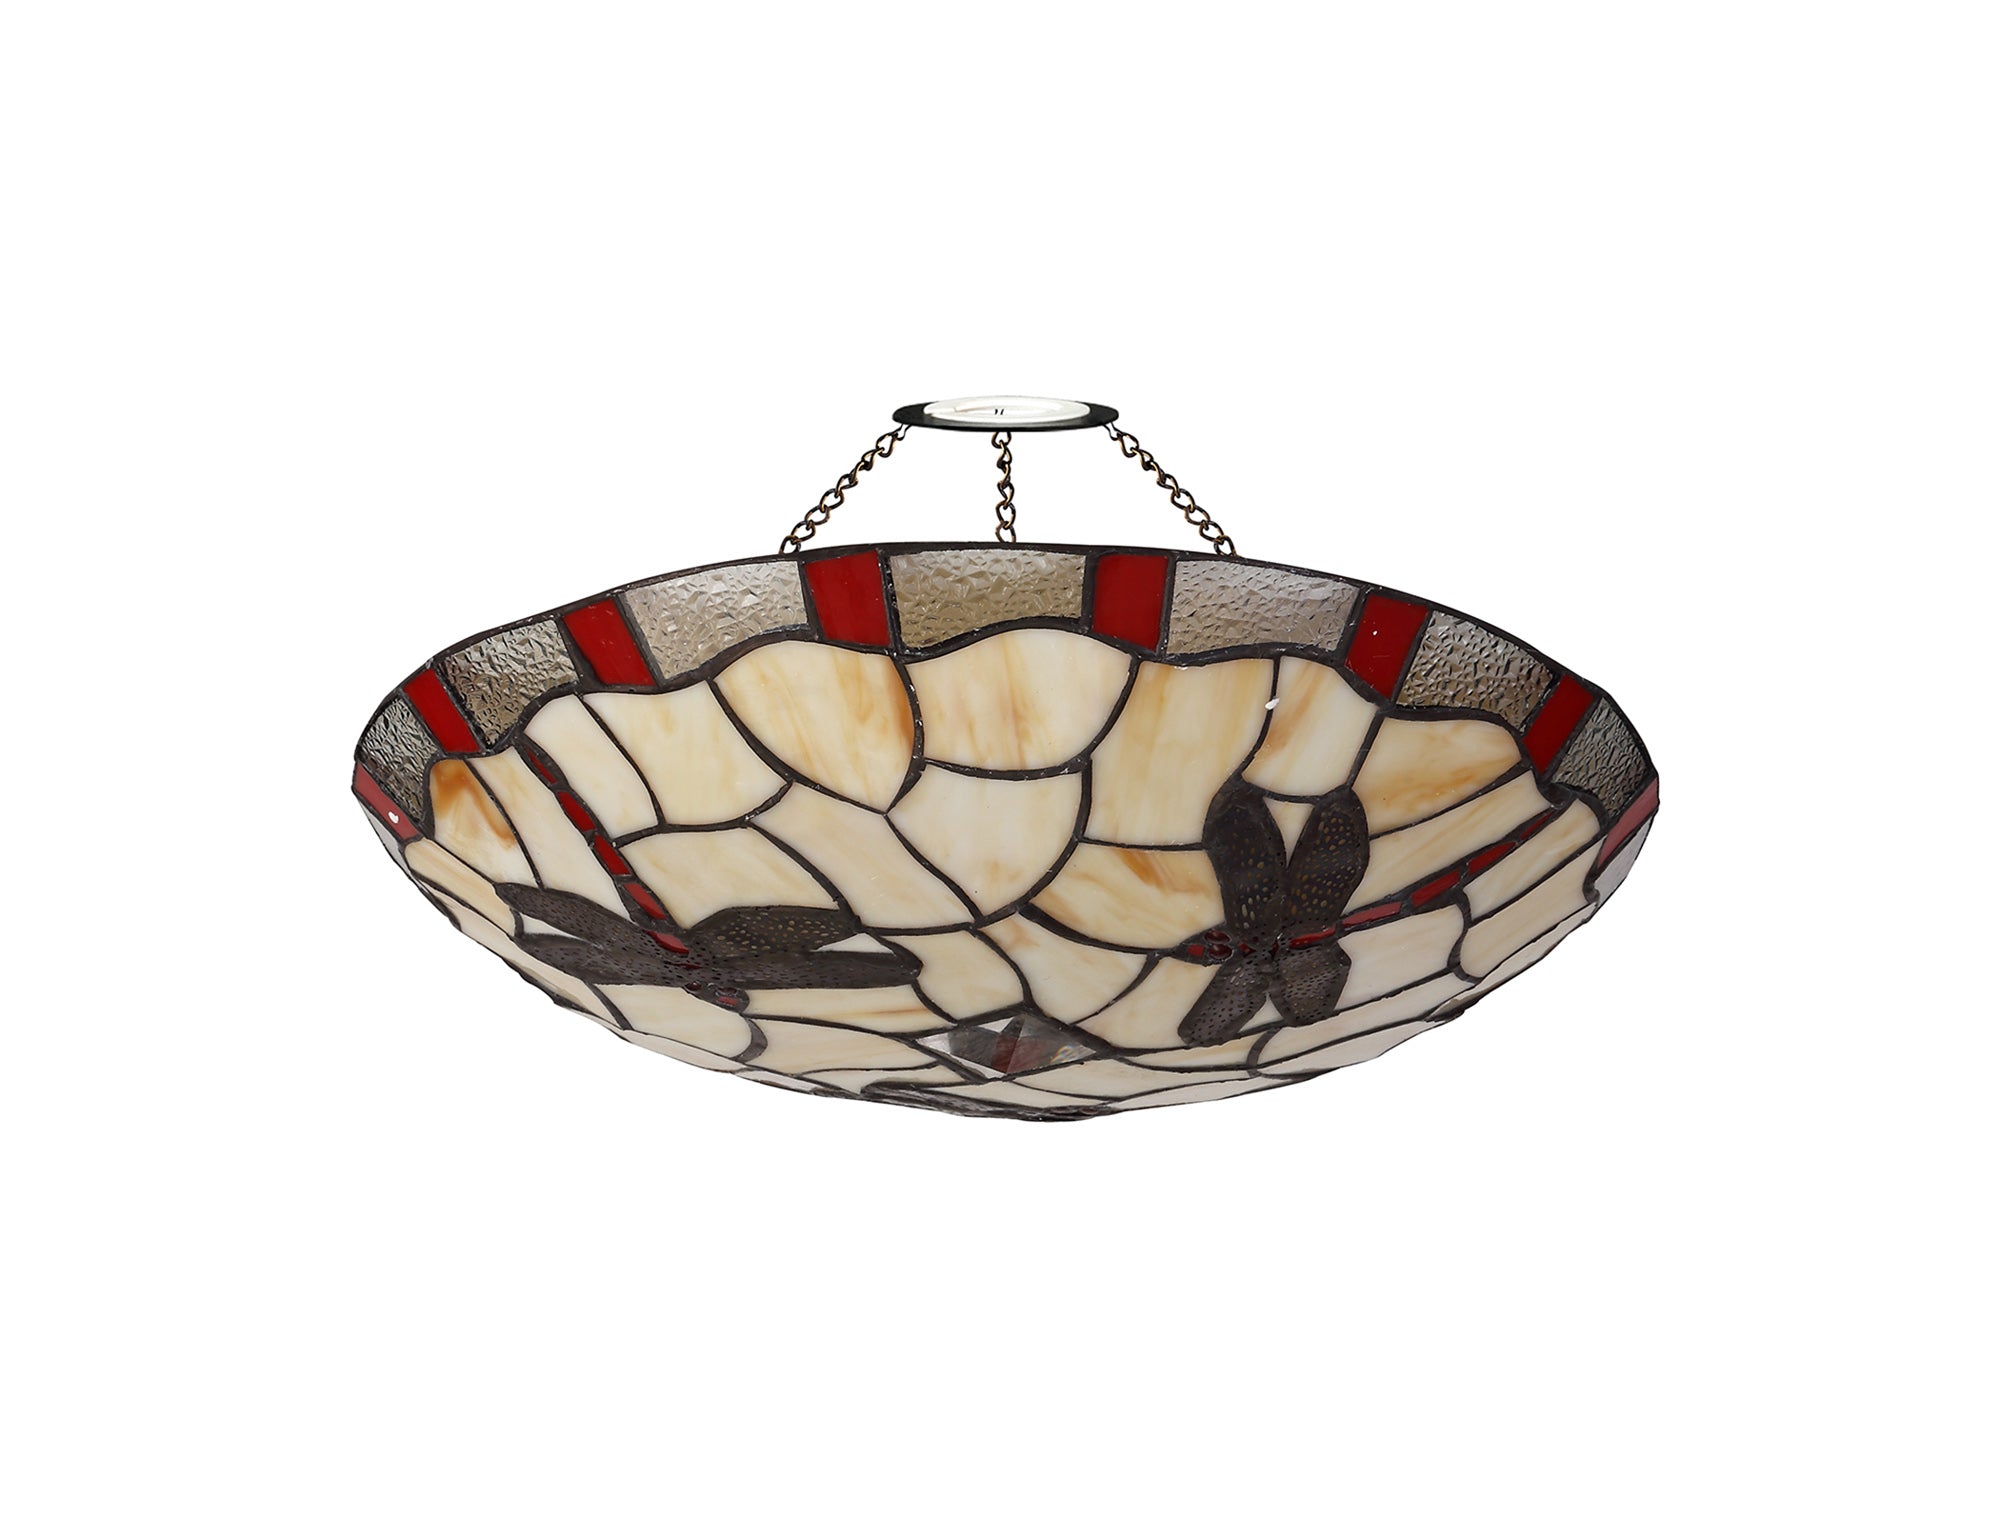 Adena 35cm Tiffany Non-electric Uplighter Shade, Red/Crealm/Clear Crystal